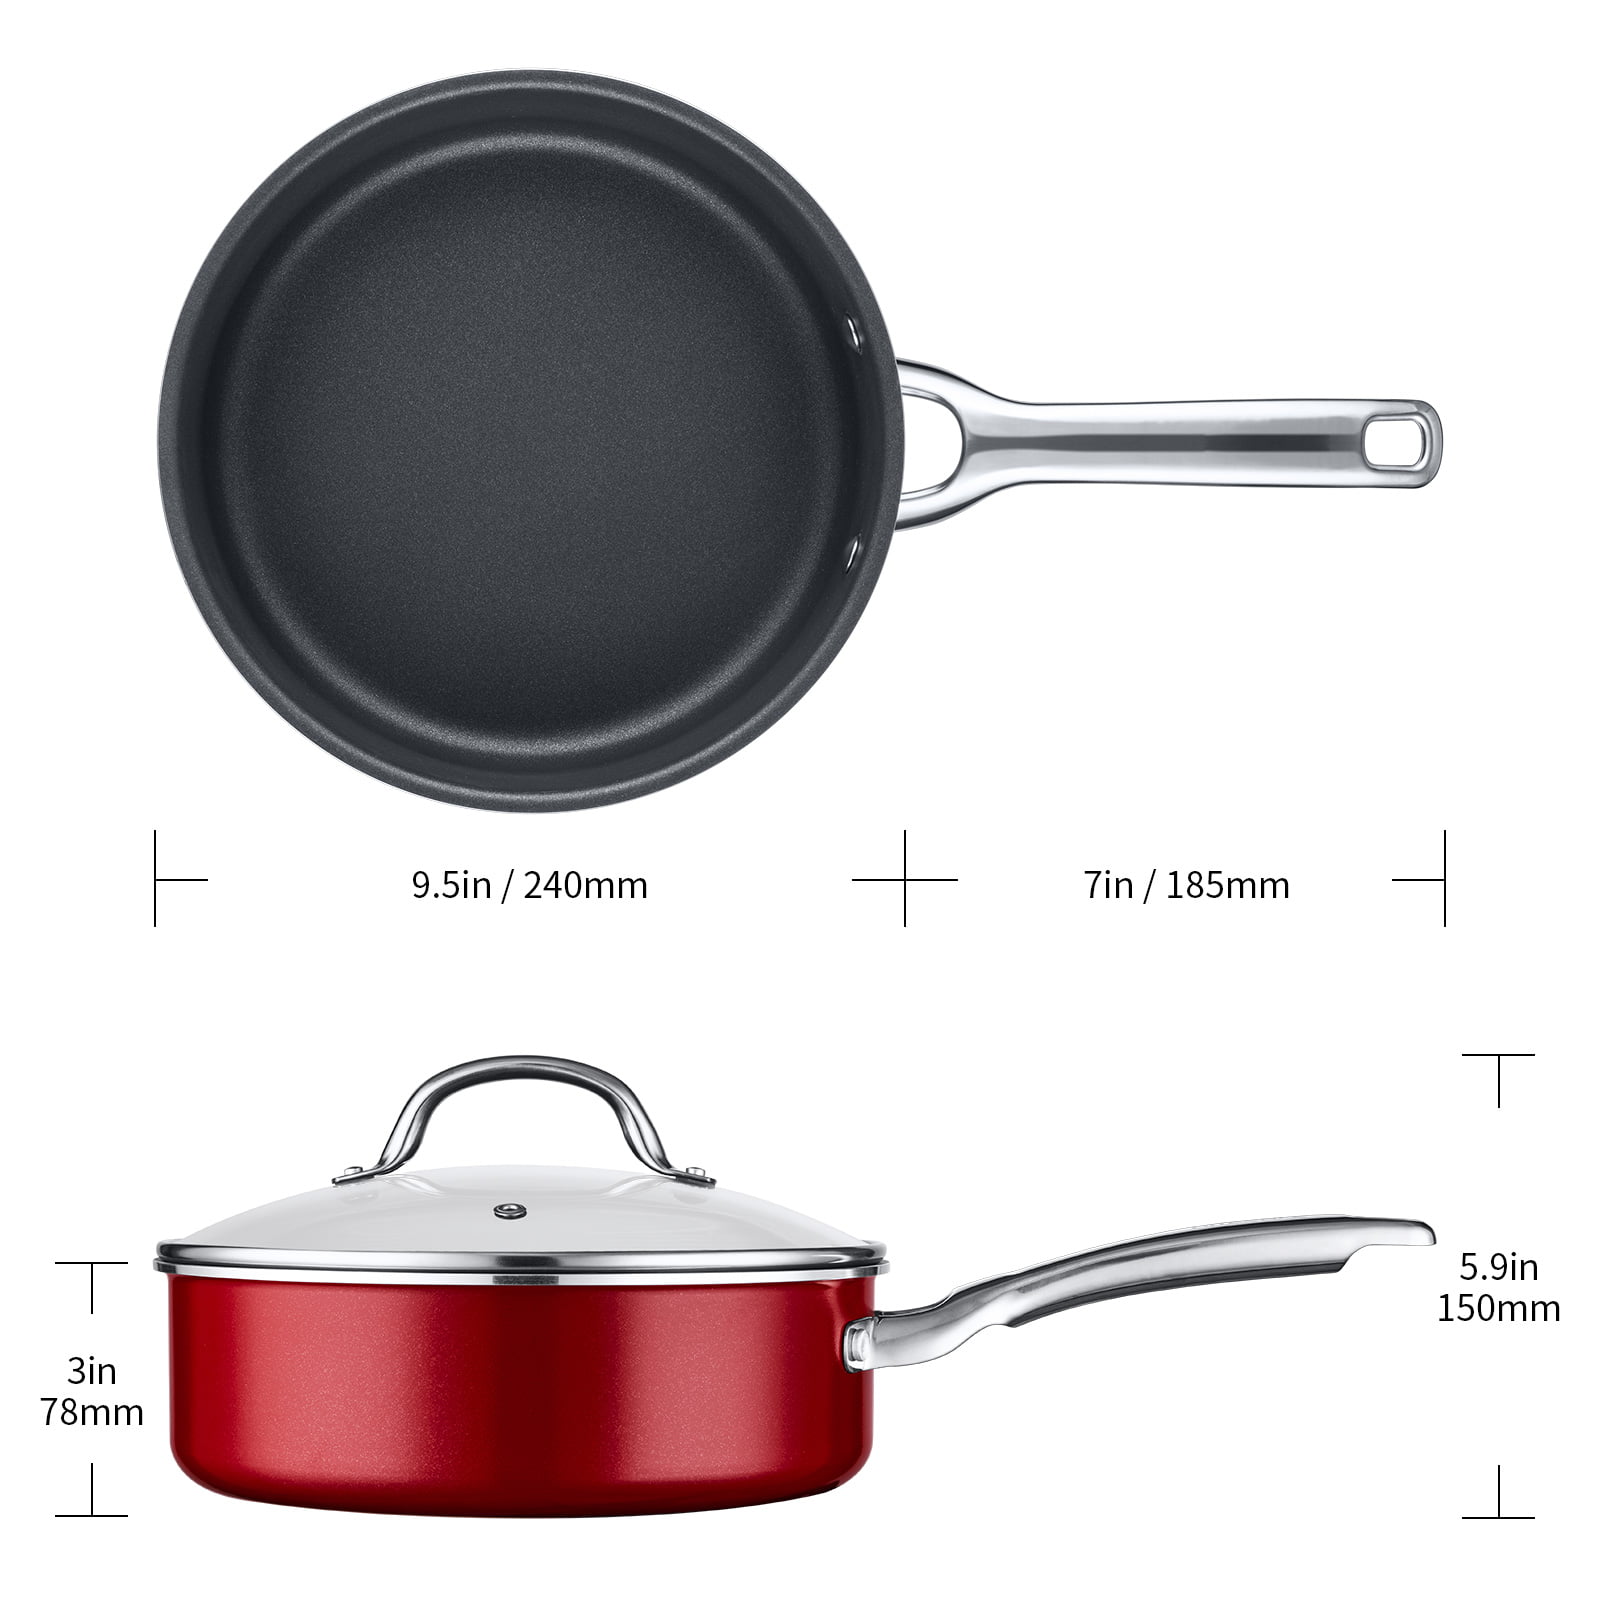  LIGTSPCE All-in-One Pan,Always Nonstick Large Skillet,Deep  Frying Pan with Lid(11-inch), Multipurpose Saute pan with Strainer,PFOA  Free chef's pan,Dishwasher and Oven Safe (Terracottaa): Home & Kitchen